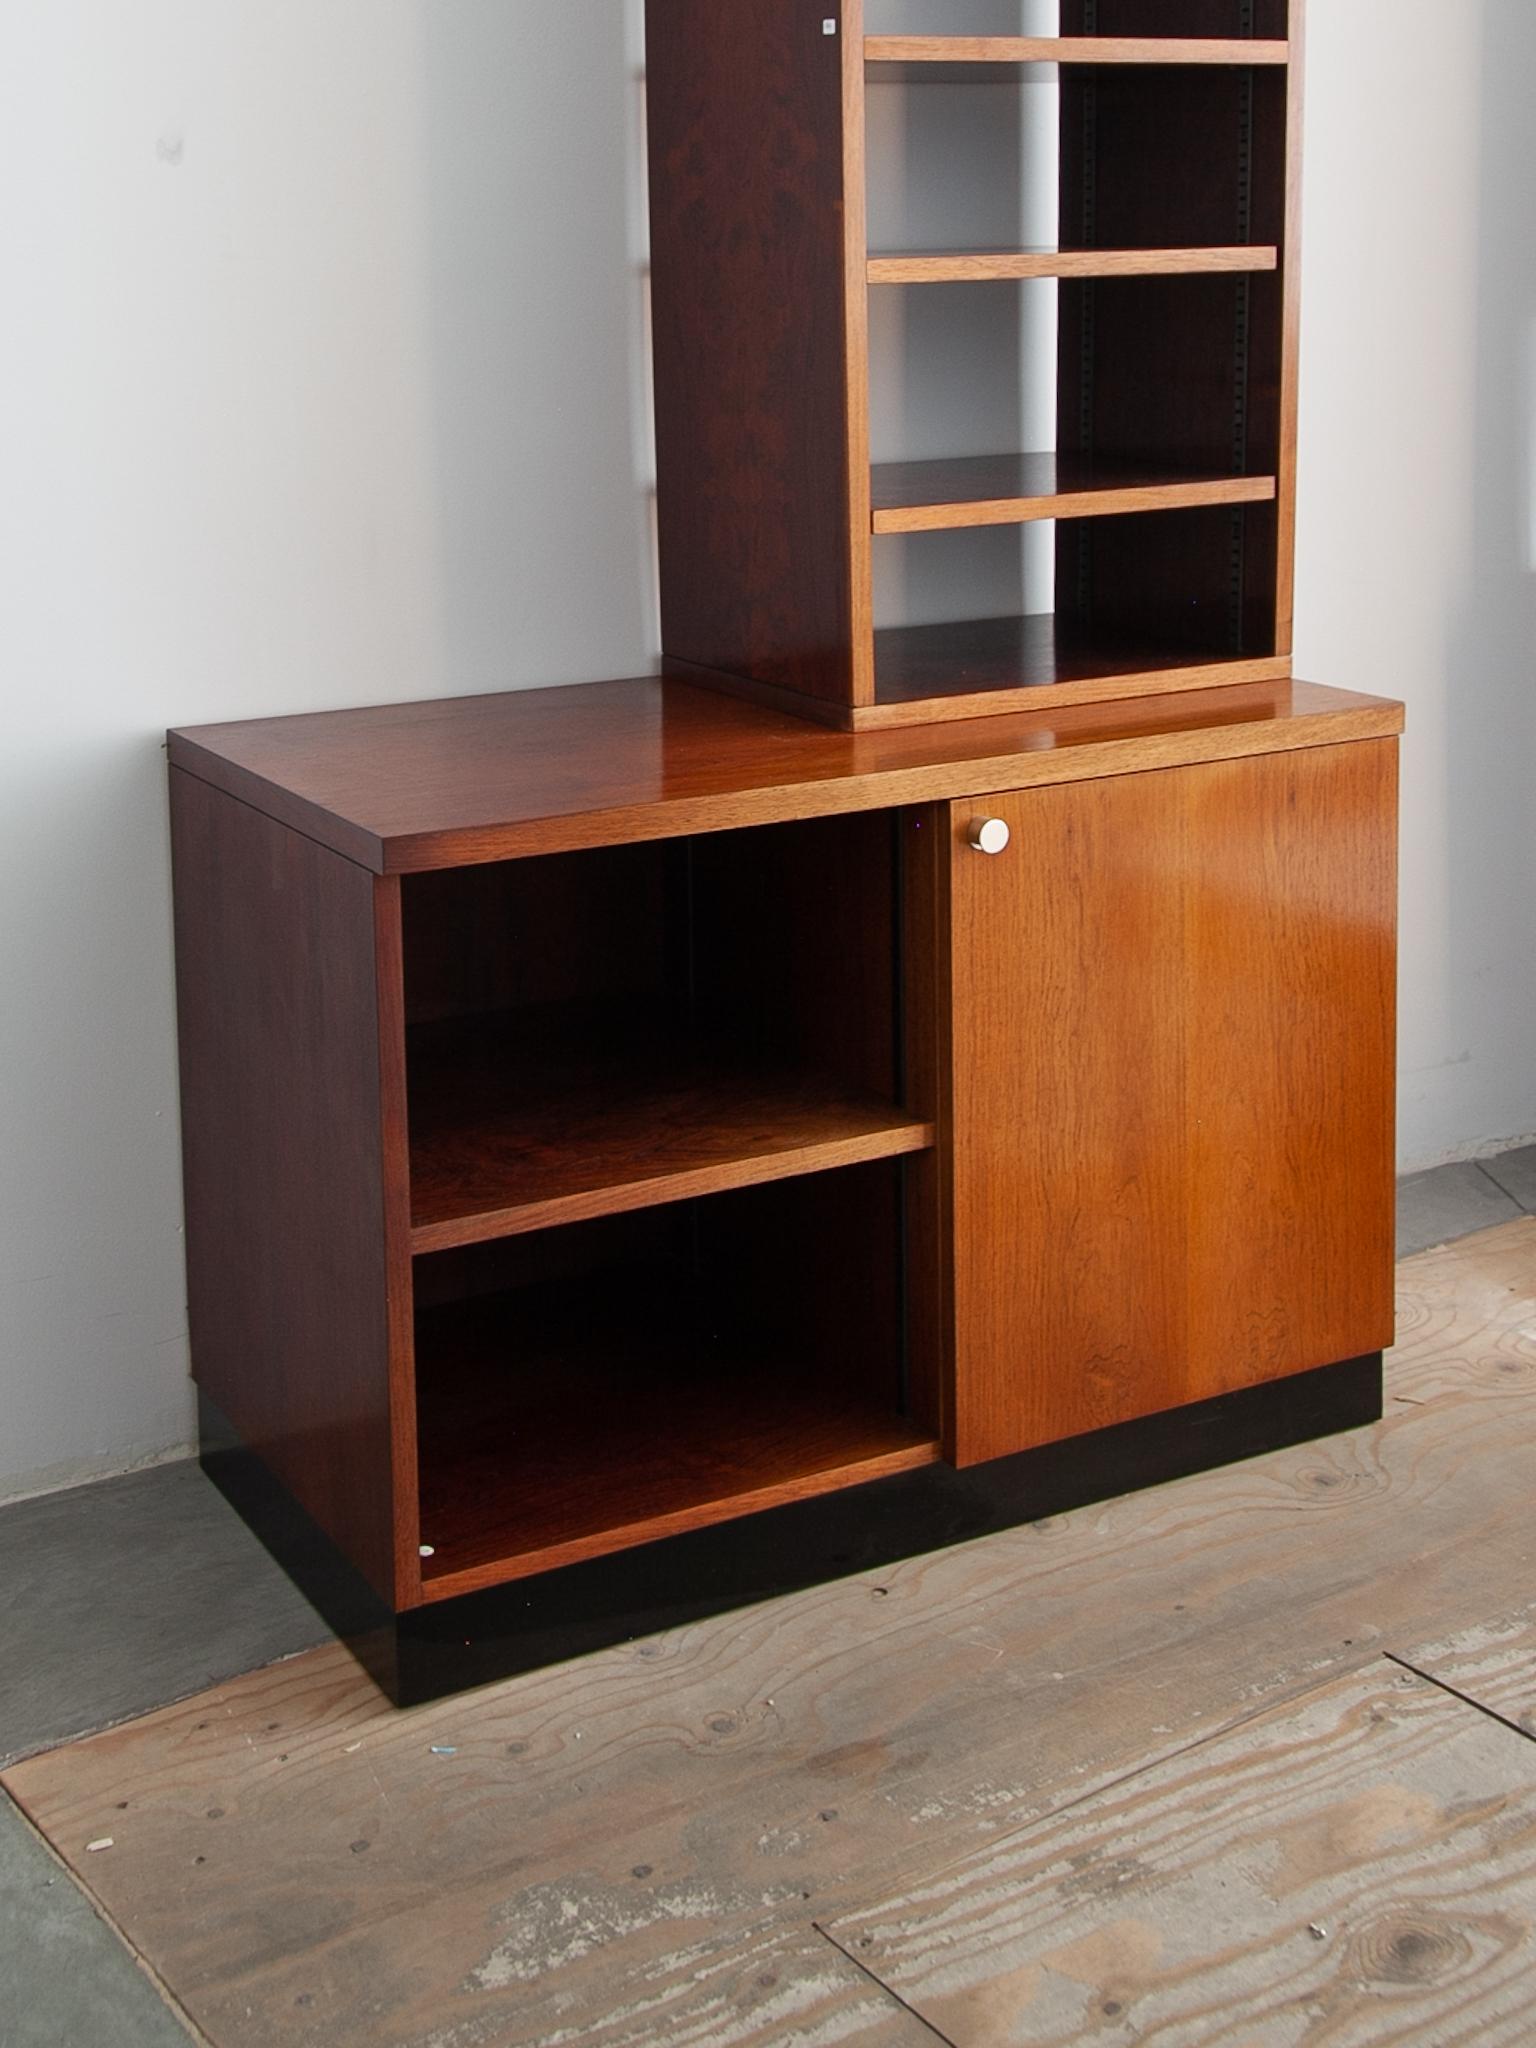 Alfred Hendrickx Cabinet, Sideboard with Top Book Shelves, 1958 for Belform In Good Condition For Sale In Antwerp, BE